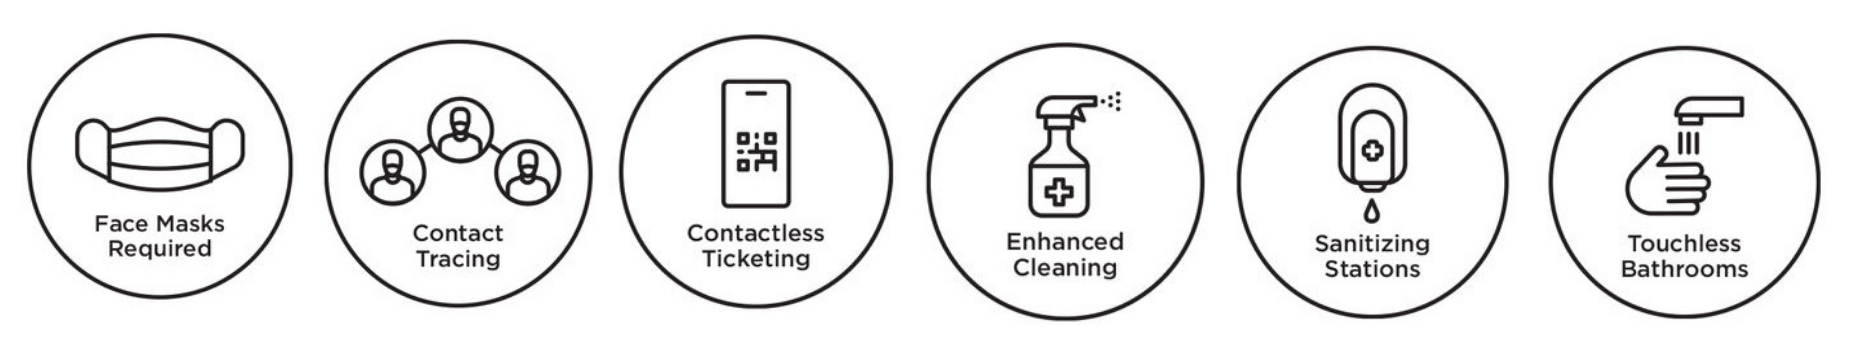 COVID-19 Safety Protocol Icons for masks required, contactless ticketing, enhanced cleaning, and sanitizing stations.